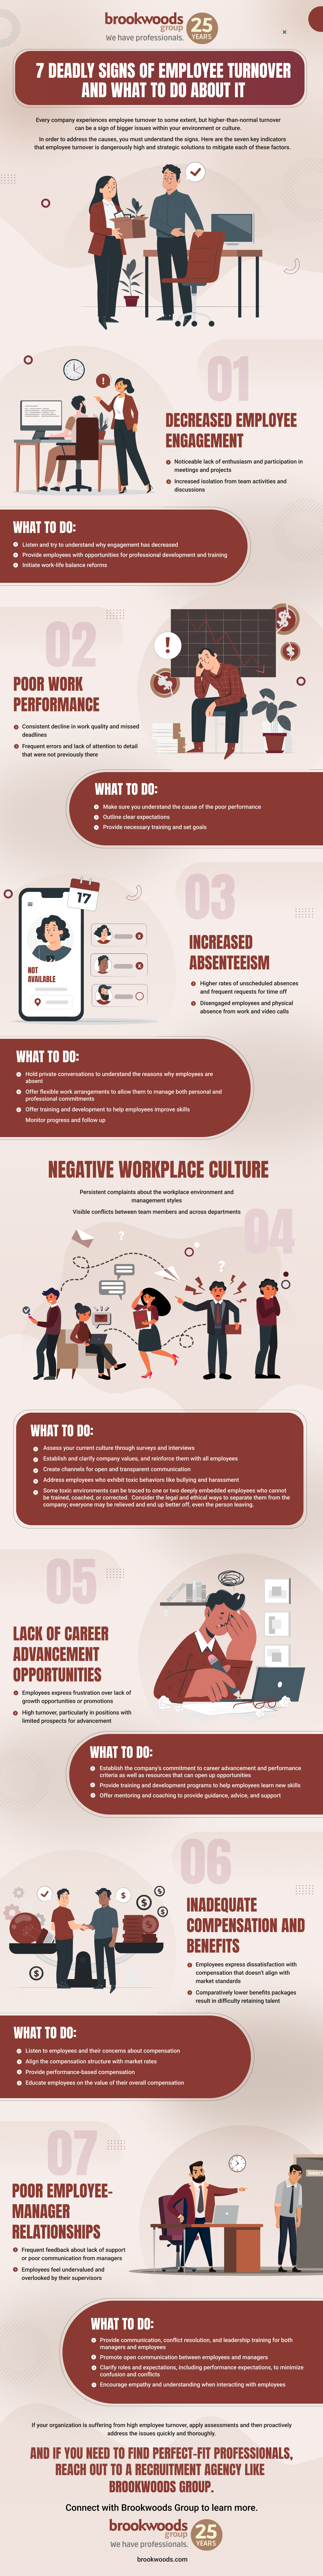 7 deadly signs of employee turnover